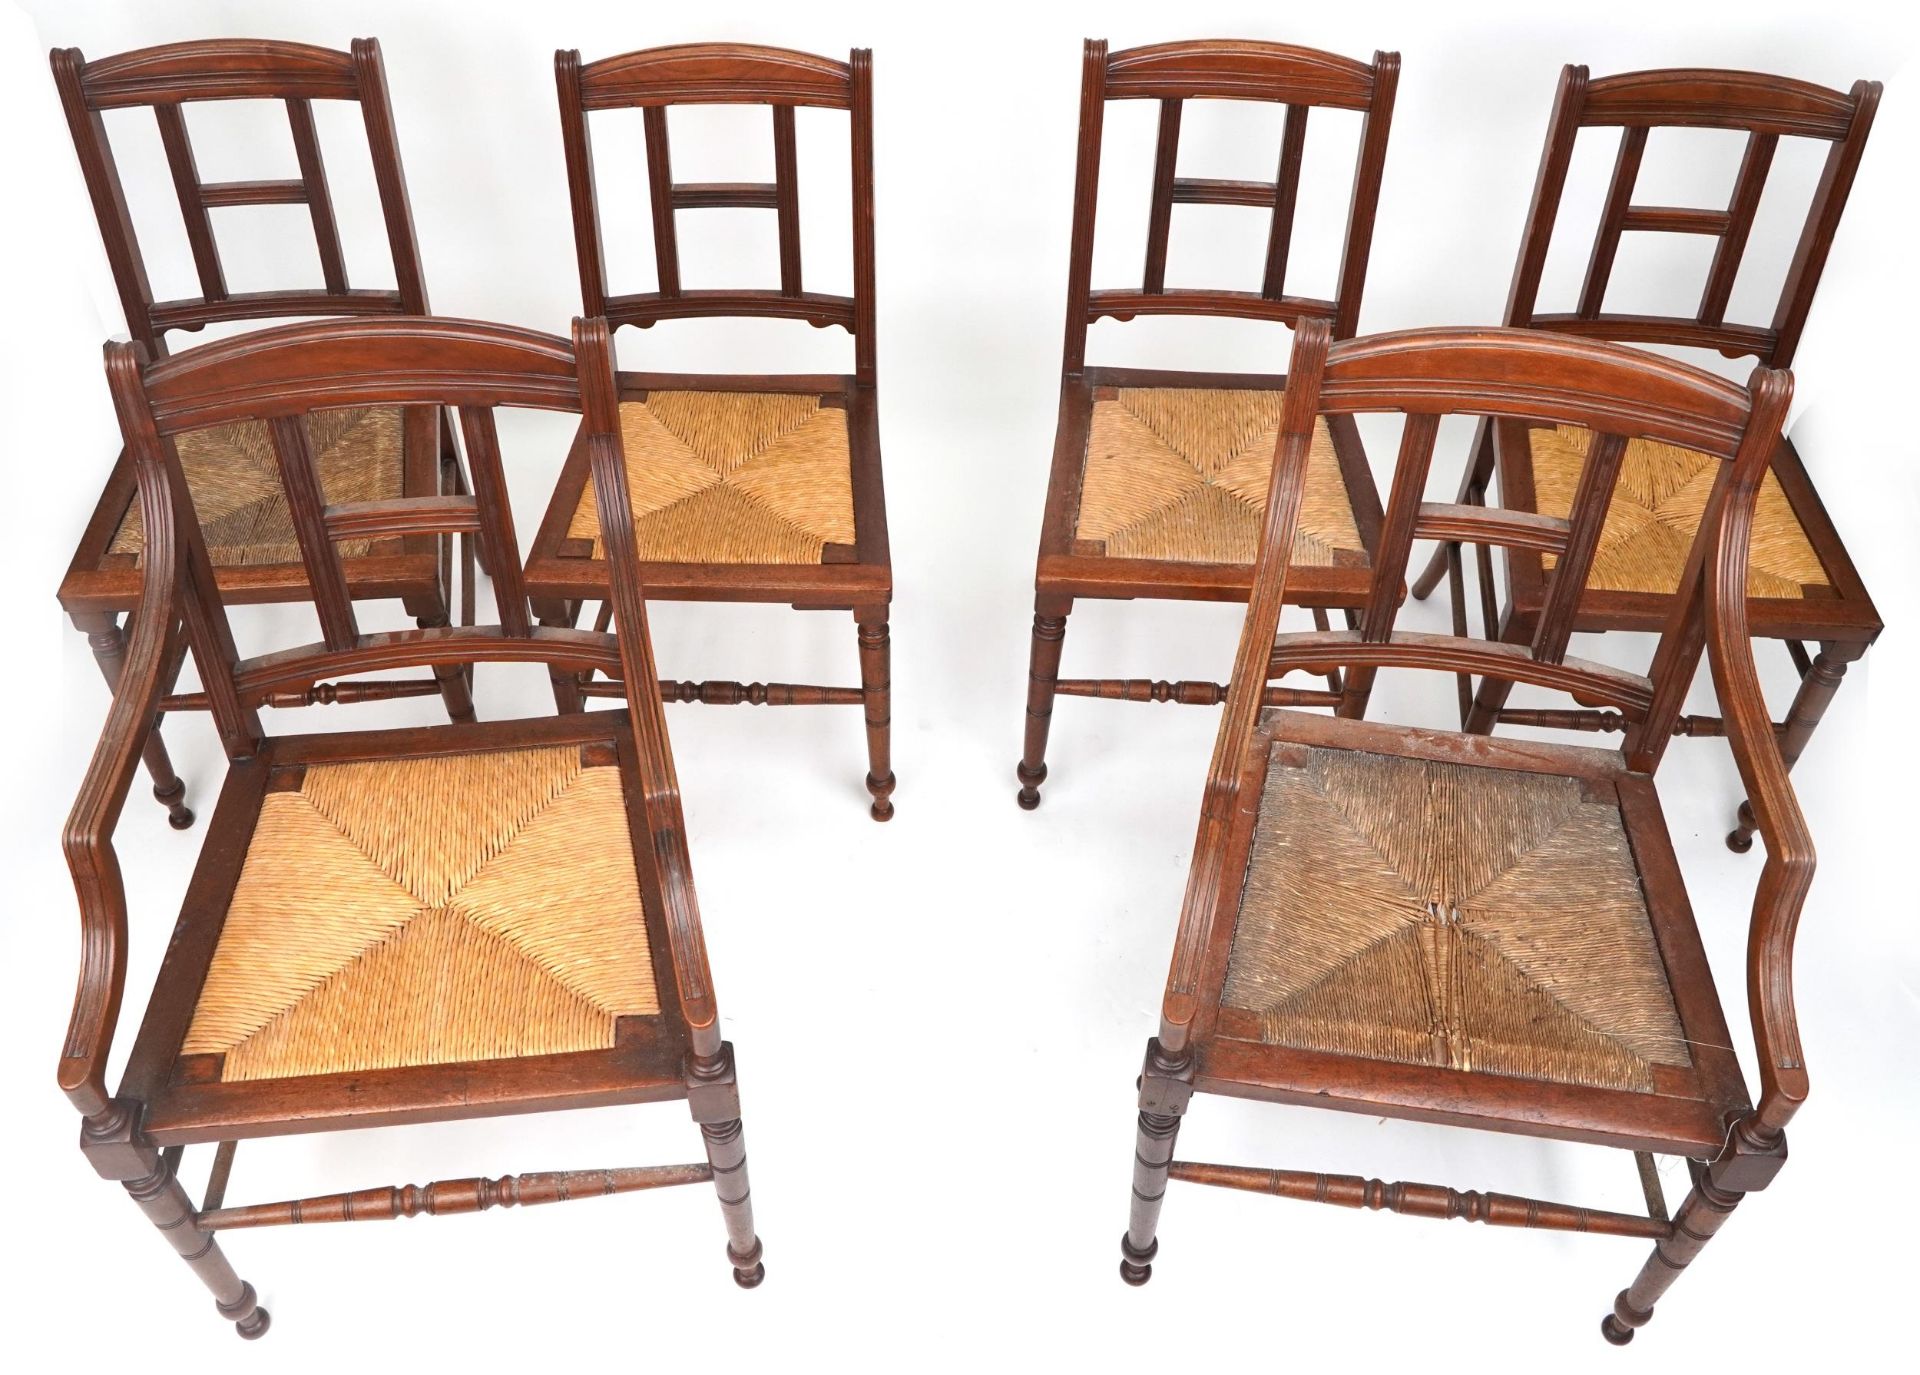 Blyth & Sons of Chiswell Street London, set of six Victorian aesthetic walnut dining chairs - Image 2 of 4